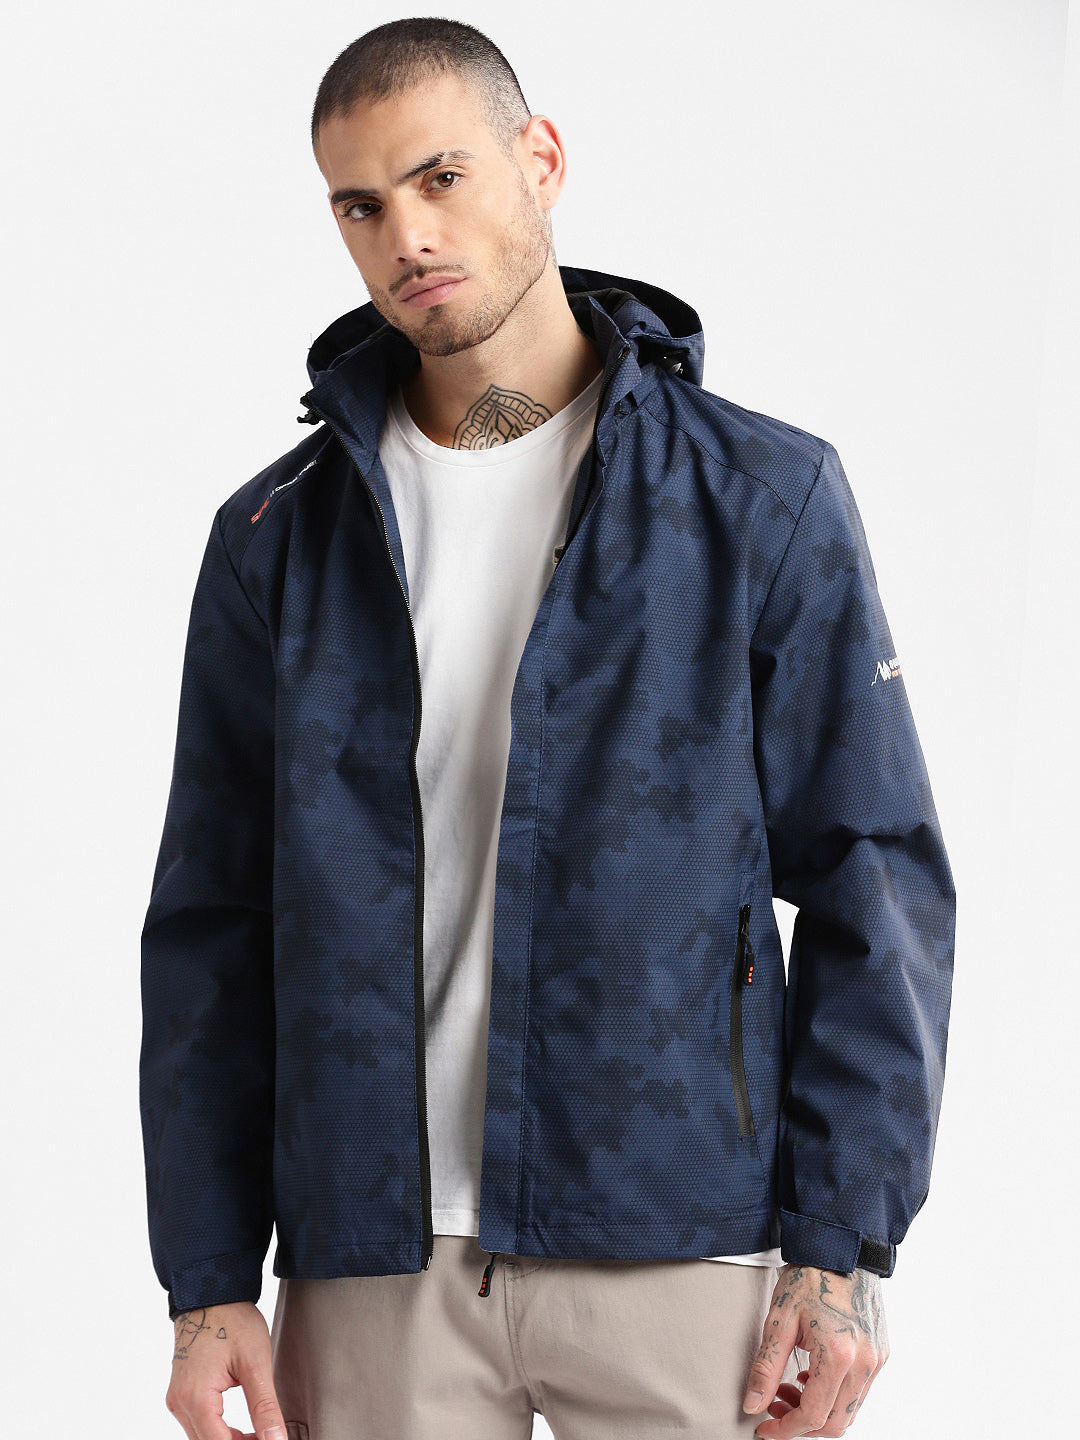 Men Hooded Navy Blue Geometric Tailored Oversized Jacket comes with Detachable Hoodie